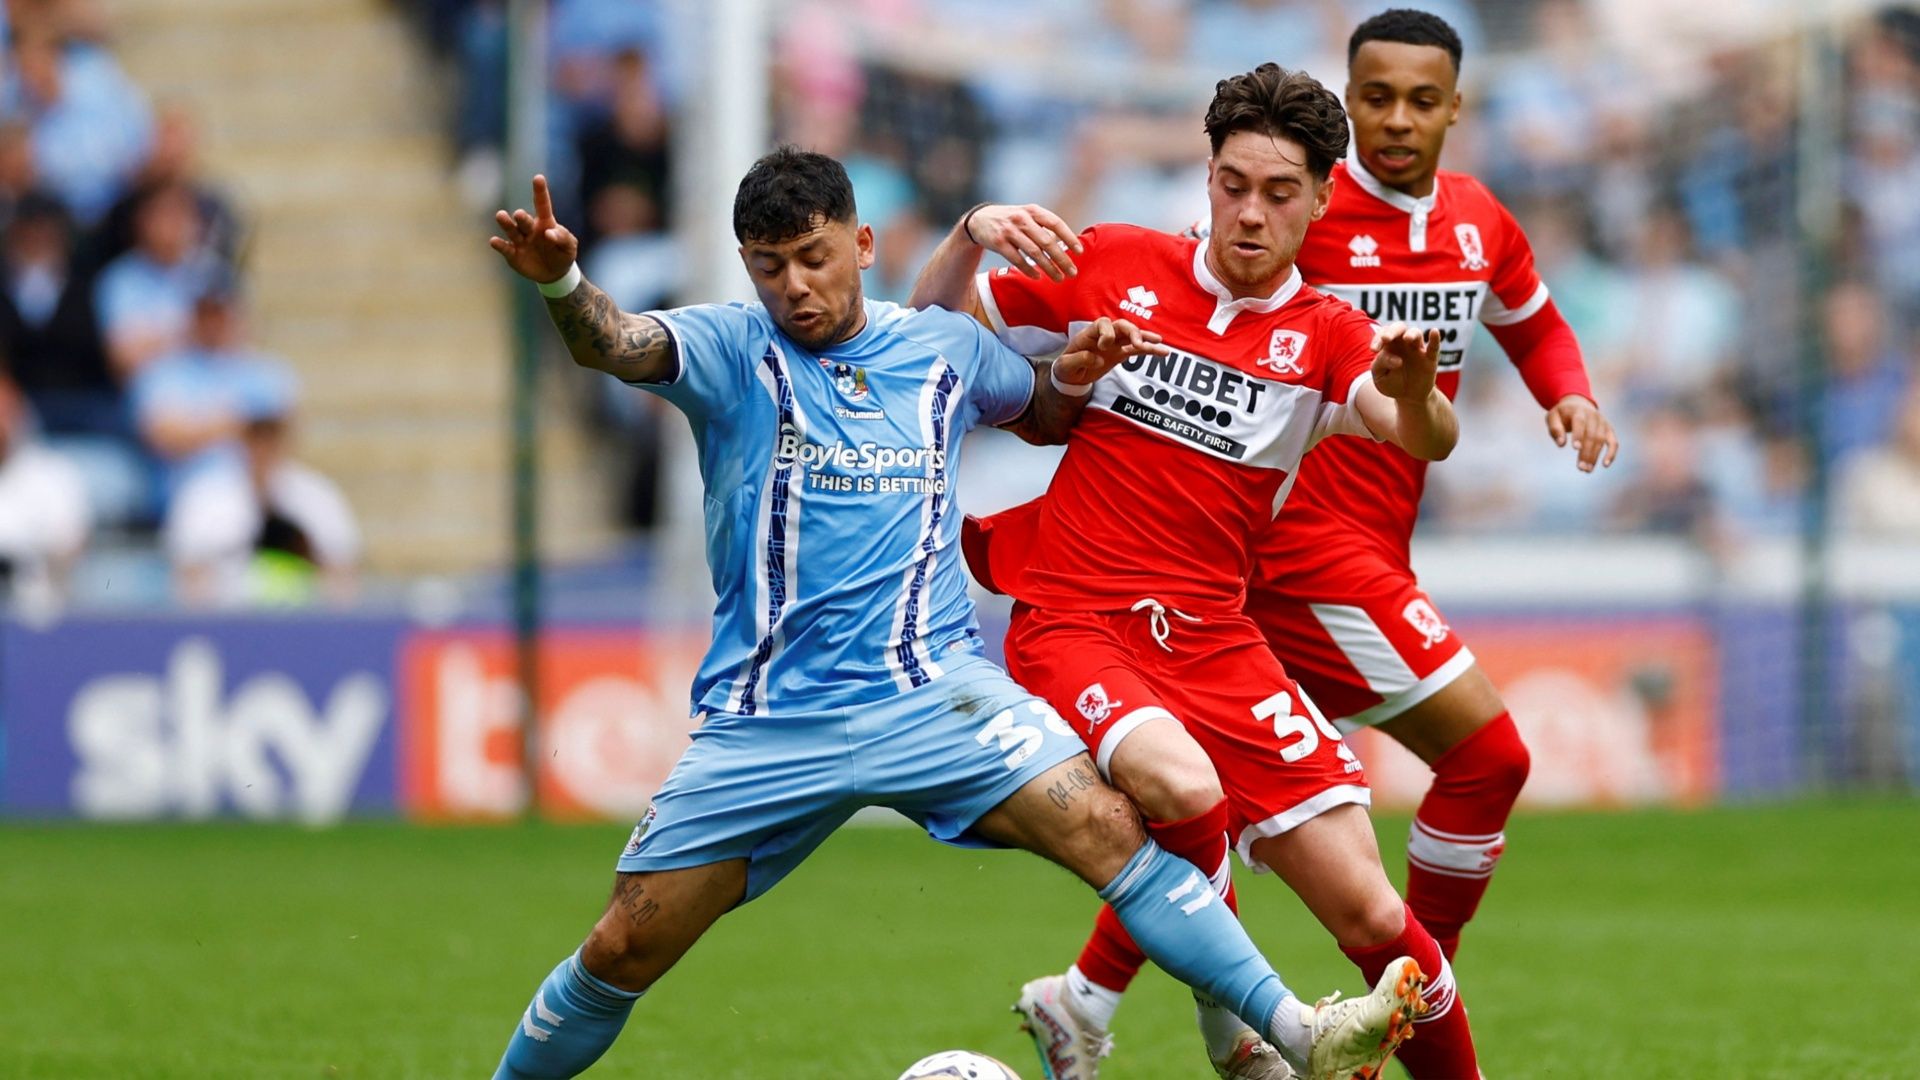 Championship - Play-off - Semi Final - First Leg - Coventry City v Middlesbrough